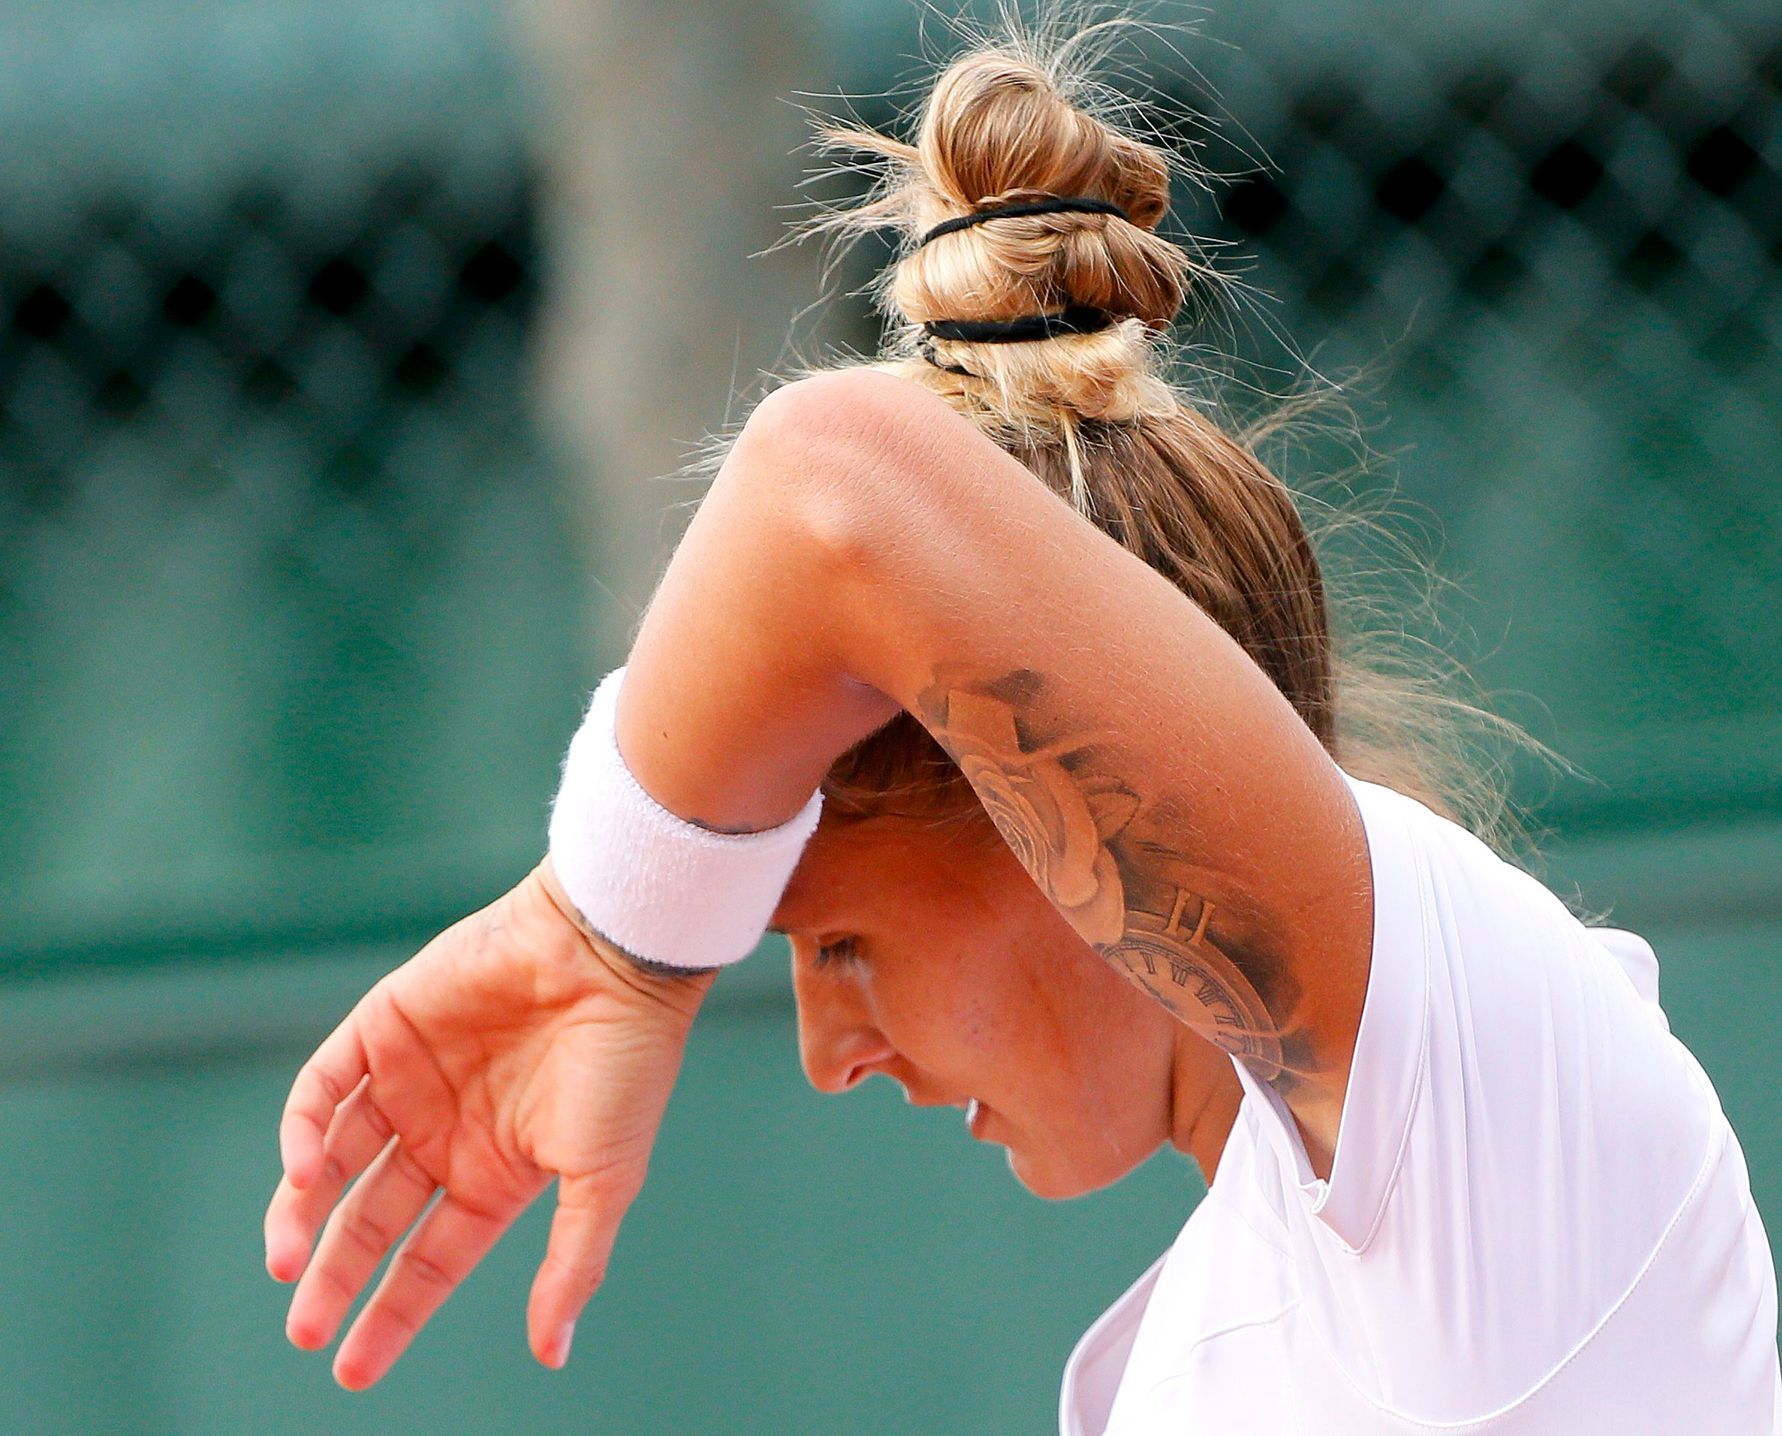 Polona Hercog of Slovenia wipes her face during the women's singles match against China's Peng Shuai at the French Open tennis tournament at the Roland Garros stadium in Paris